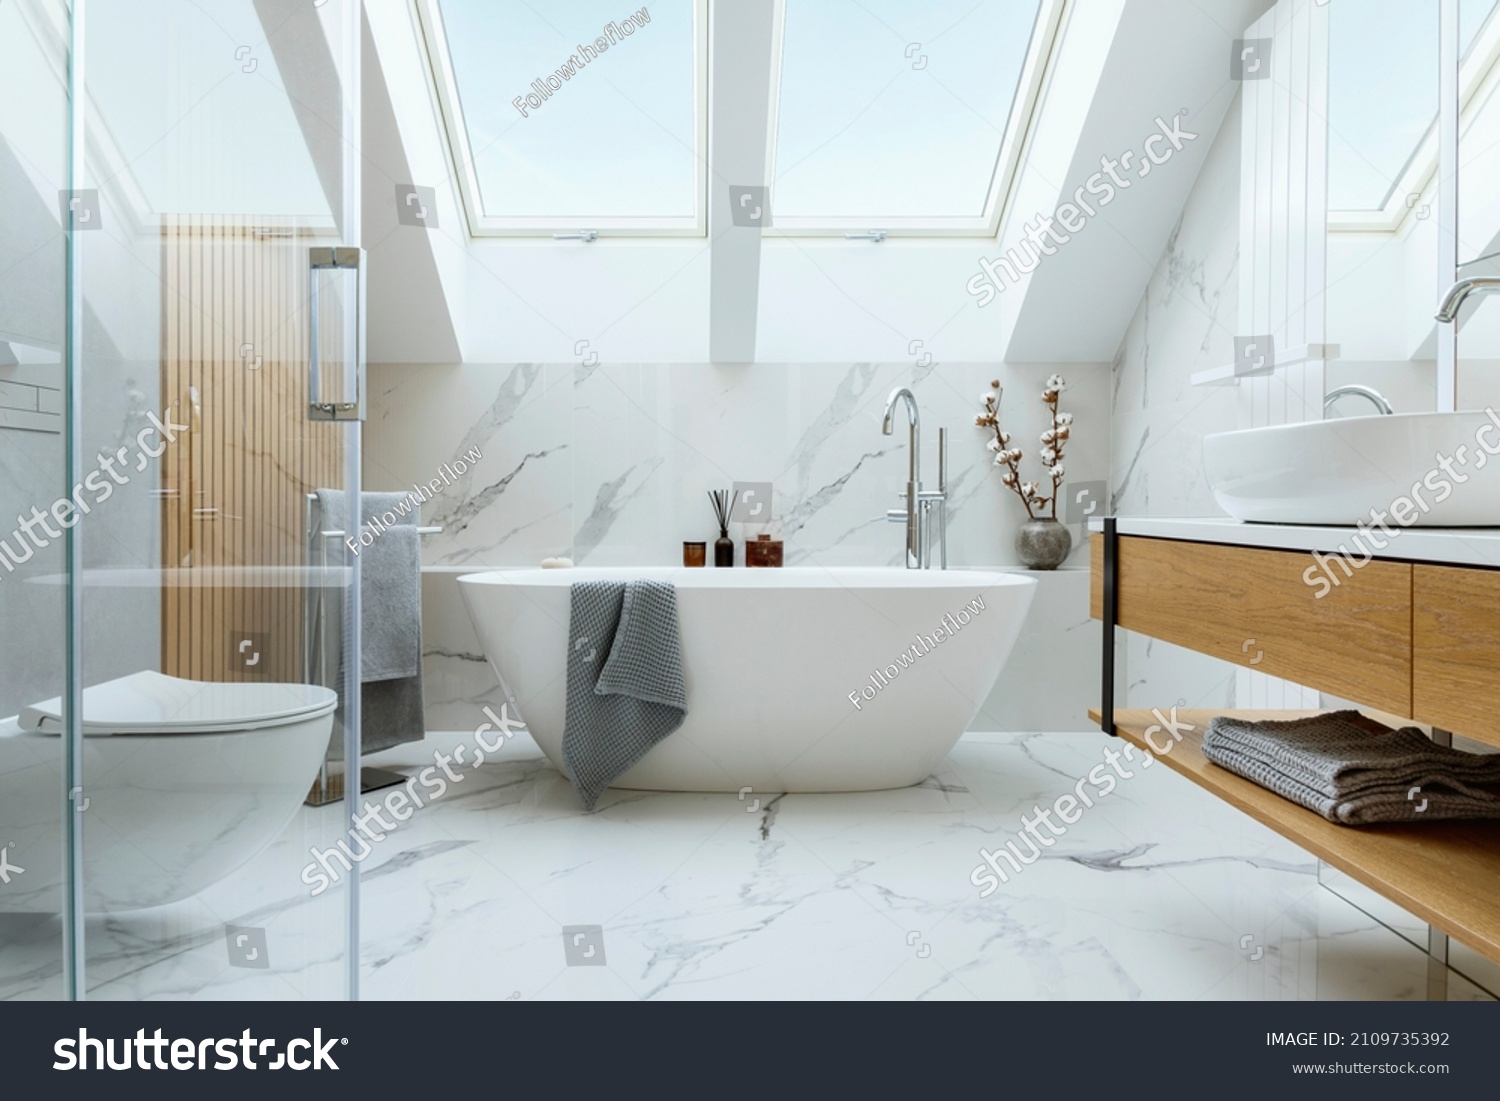 Stylish bathroom interior design with marble panels. Bathtub, towels and other personal bathroom accessories. Modern glamour interior concept. Roof window. Template. #2109735392